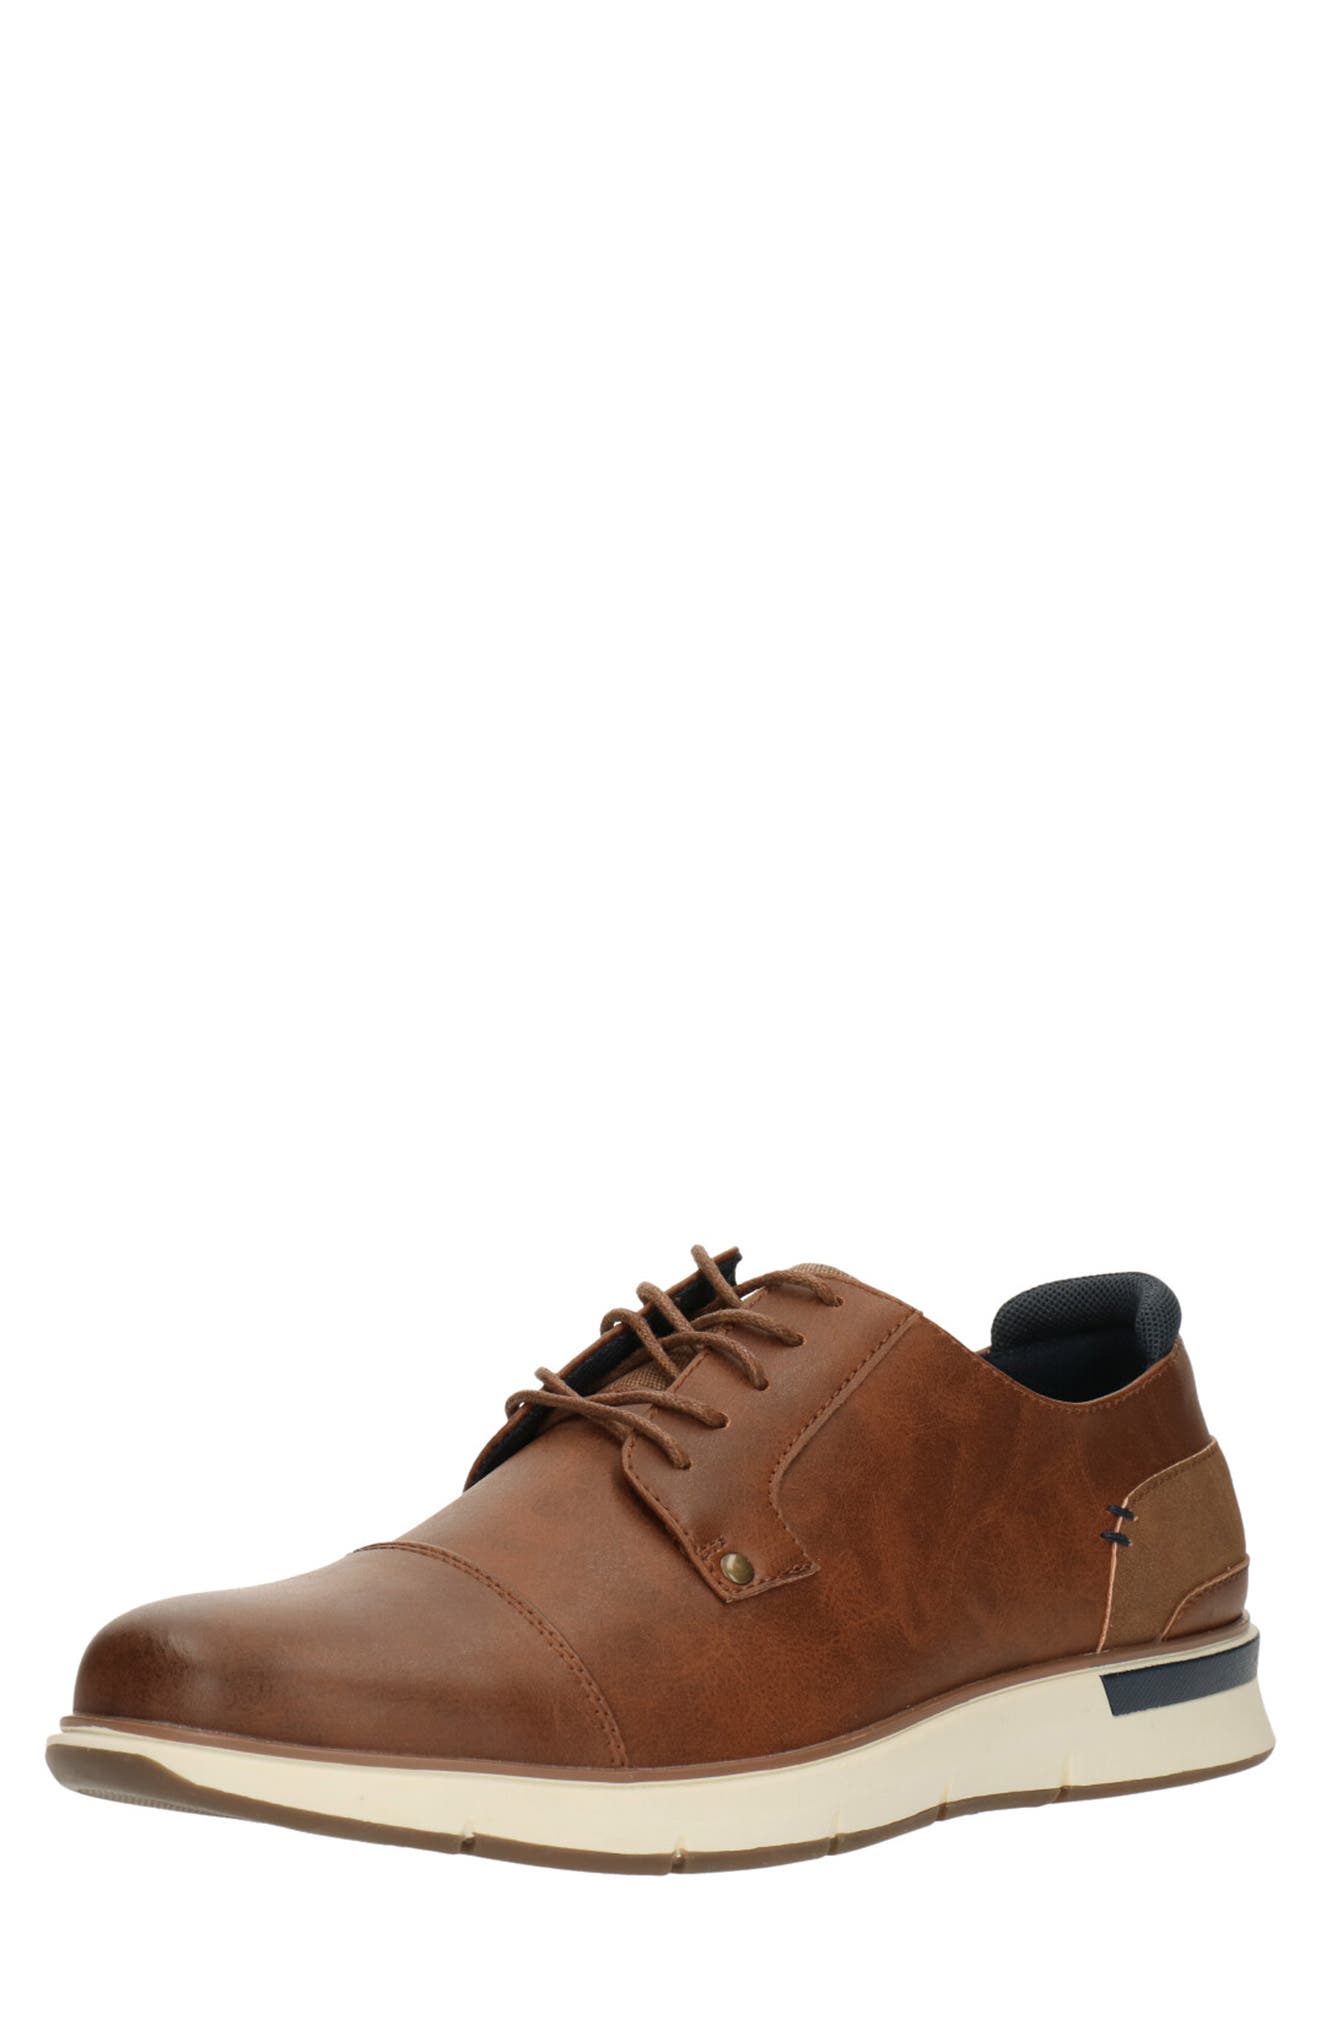 Faux Leather Oxford Bullboxer